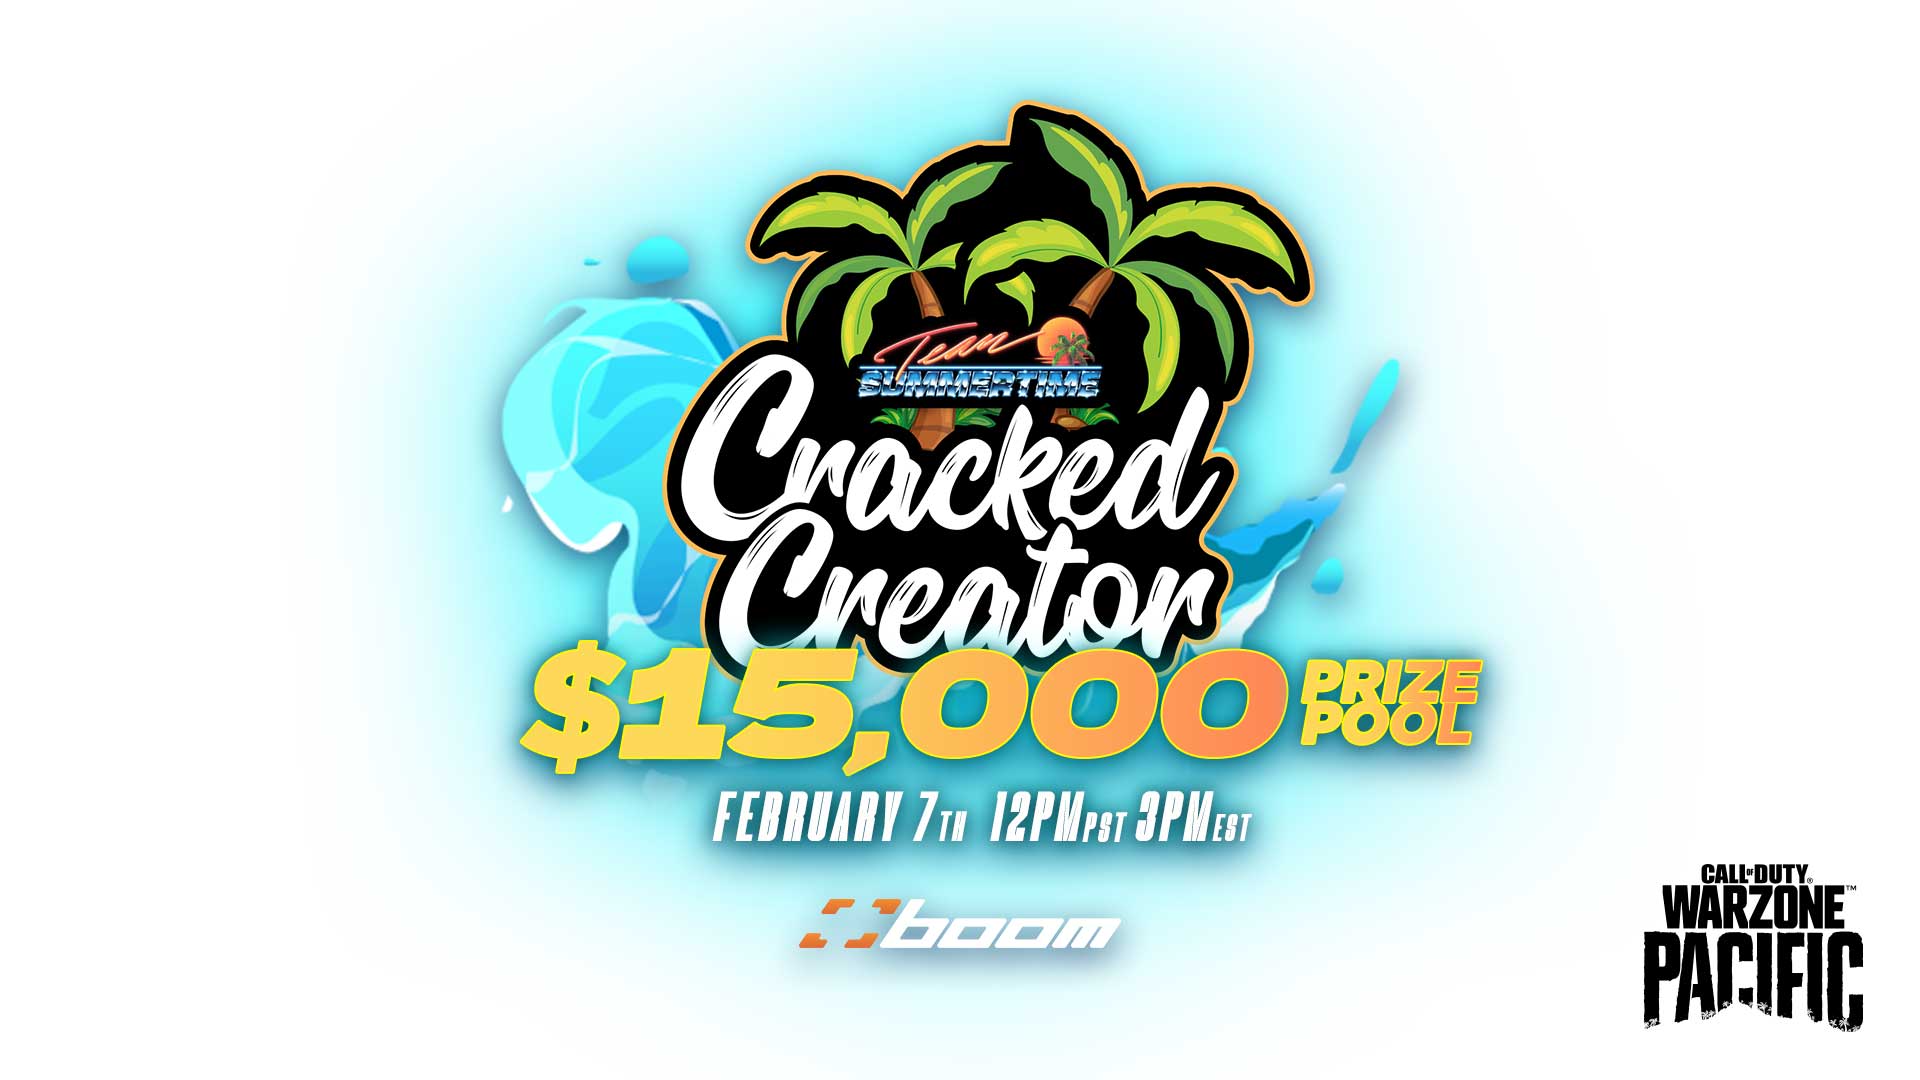 Cracked Creator is BACK for another $15,000 Showdown!